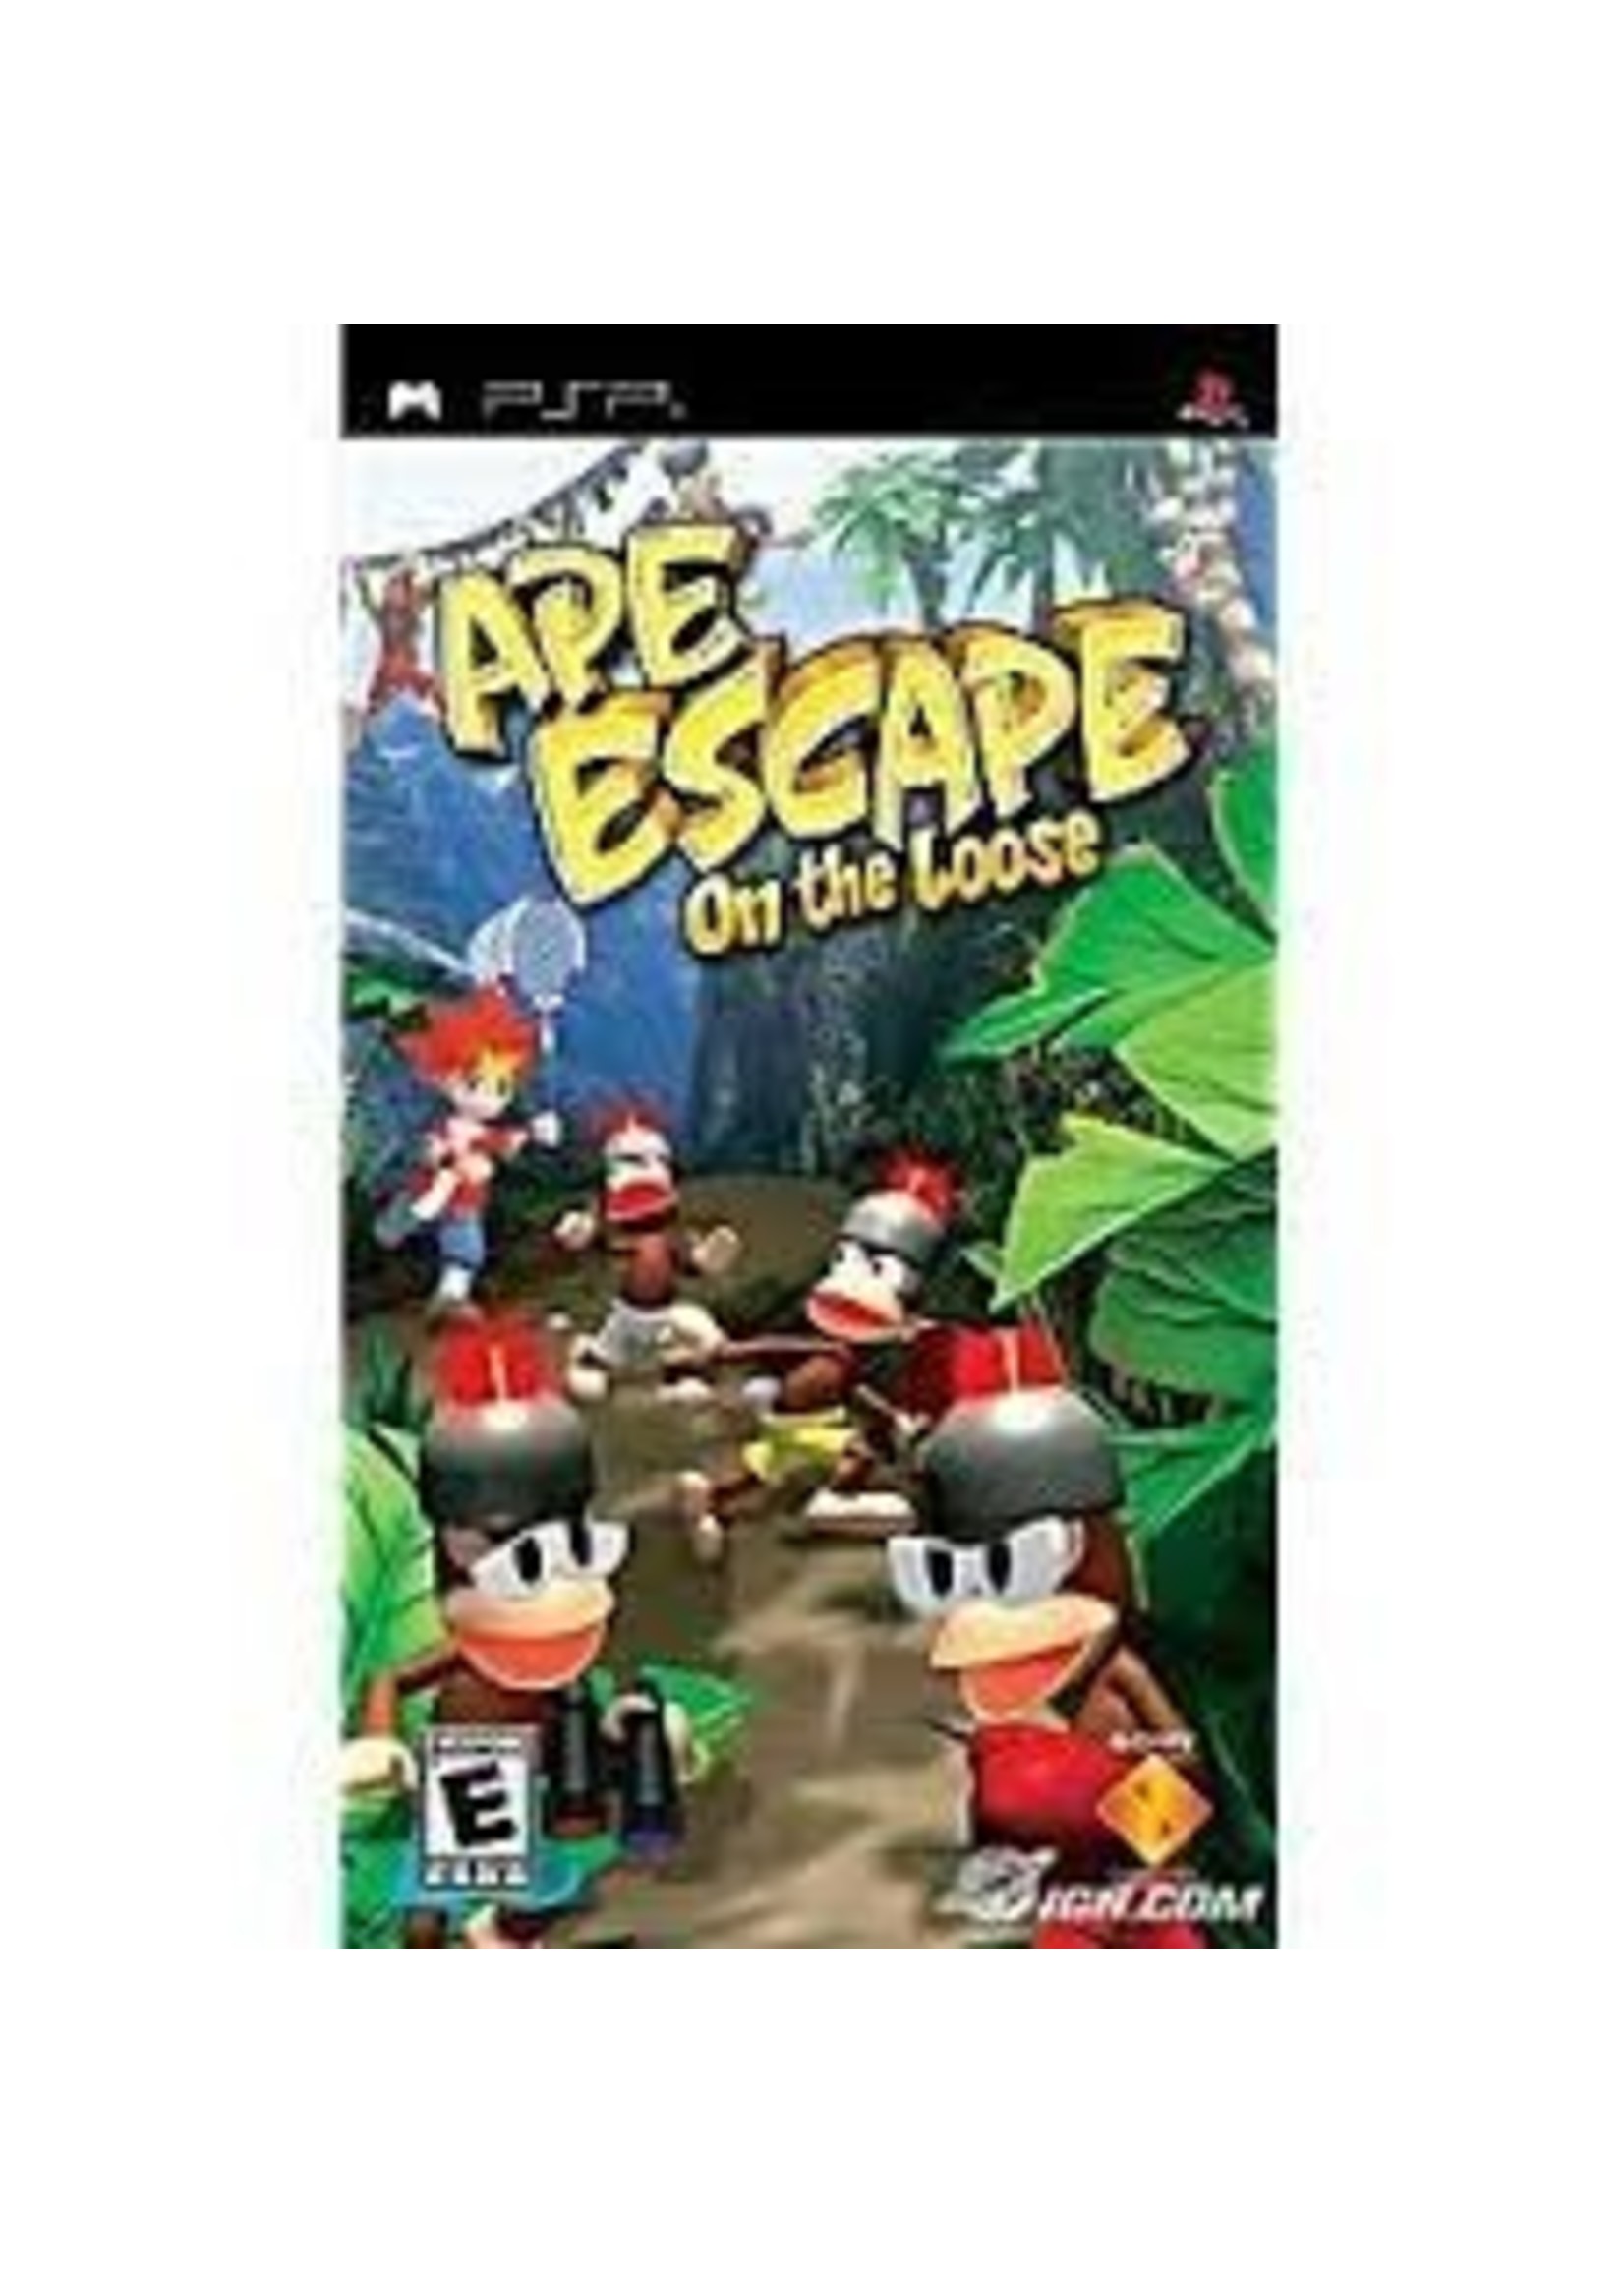 Sony Playstation Portable (PSP) Ape Escape On the Loose